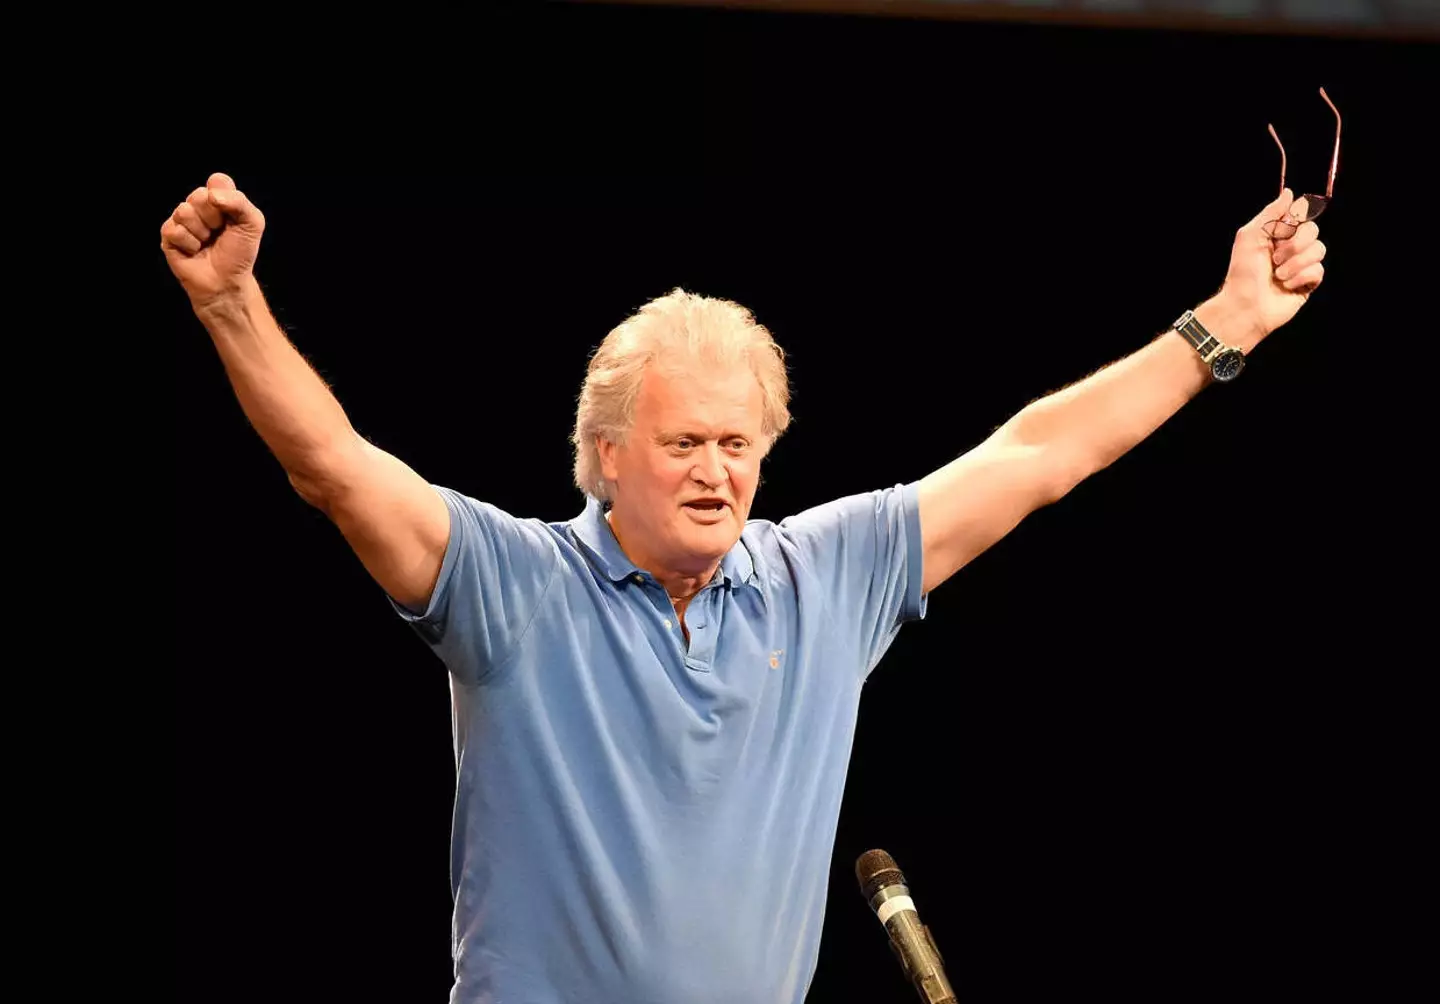 Tim Martin owns over 870 Wetherspoons pubs.